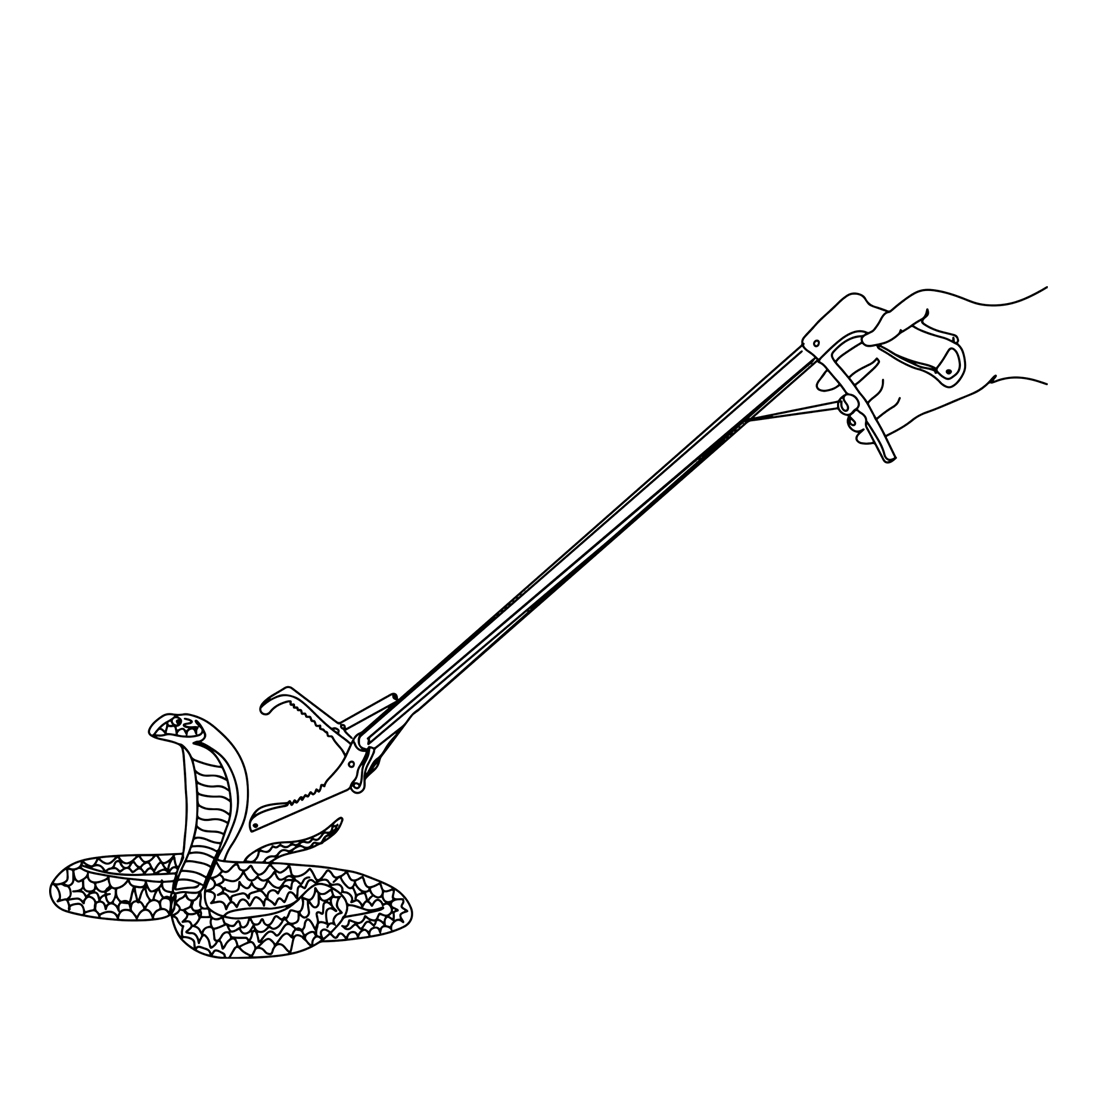 Cartoon Illustration: Continuous Sketch Snake Catcher Tools, Reptile Handling Tools : Cartoon Snake Catcher Illustration, Snake Catcher Equipment: Pliers, Tongs, Stick Cartoon Drawing cover image.